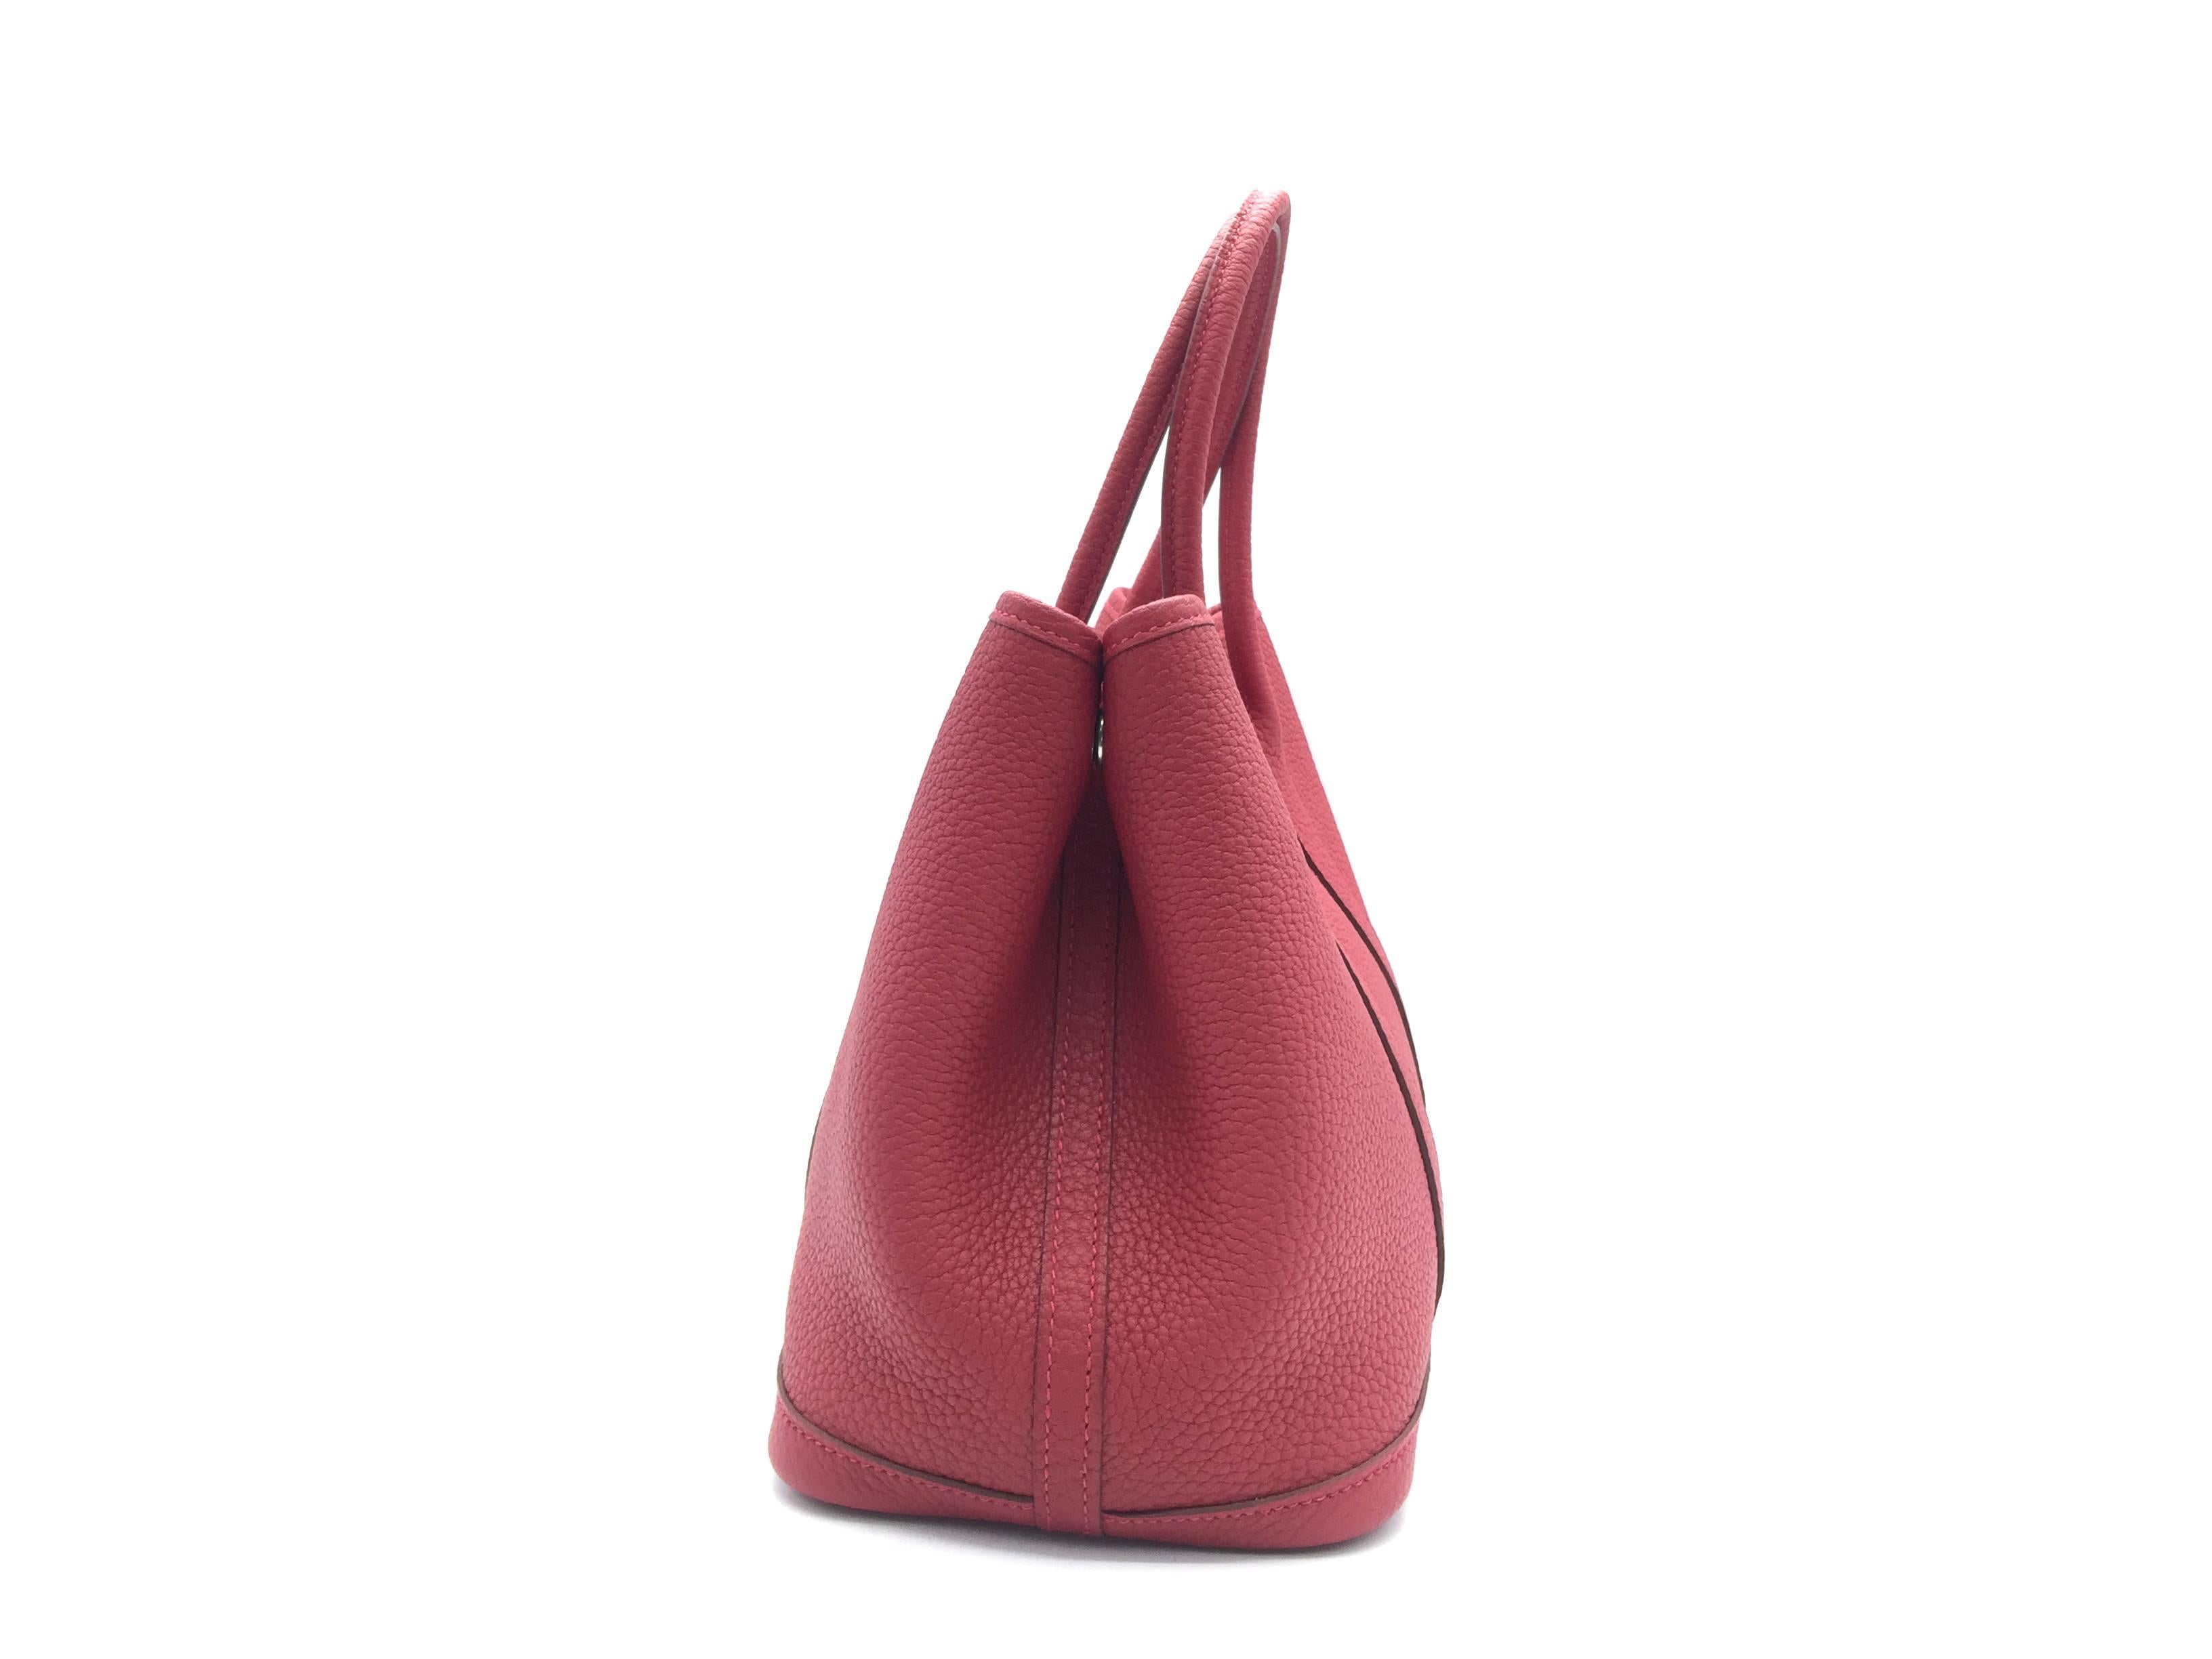 Color: Red / Rouge Piment (designer color)
Material: Country Leather

Condition:
Rank N
Overall: Brand New, Not used
Surface: Good
Corners: Good
Edges: Good
Handles/Straps: Good
Hardware: Good

Dimension:
W30 × H21 × D14cm（W11.8" × H8.2" ×